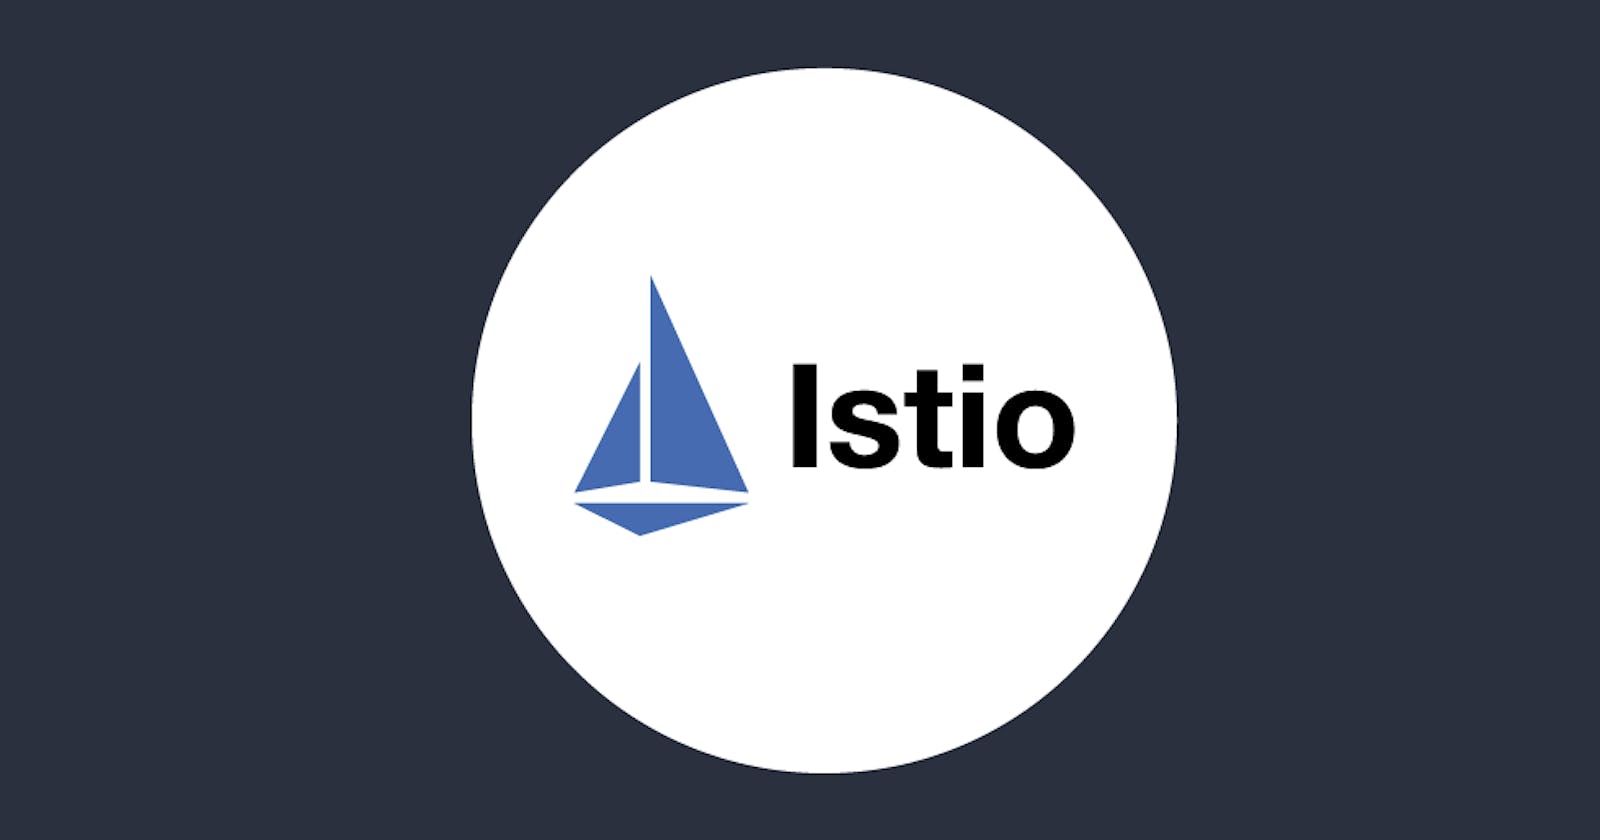 Istio⛵: Strengthening K8s with Service Mesh